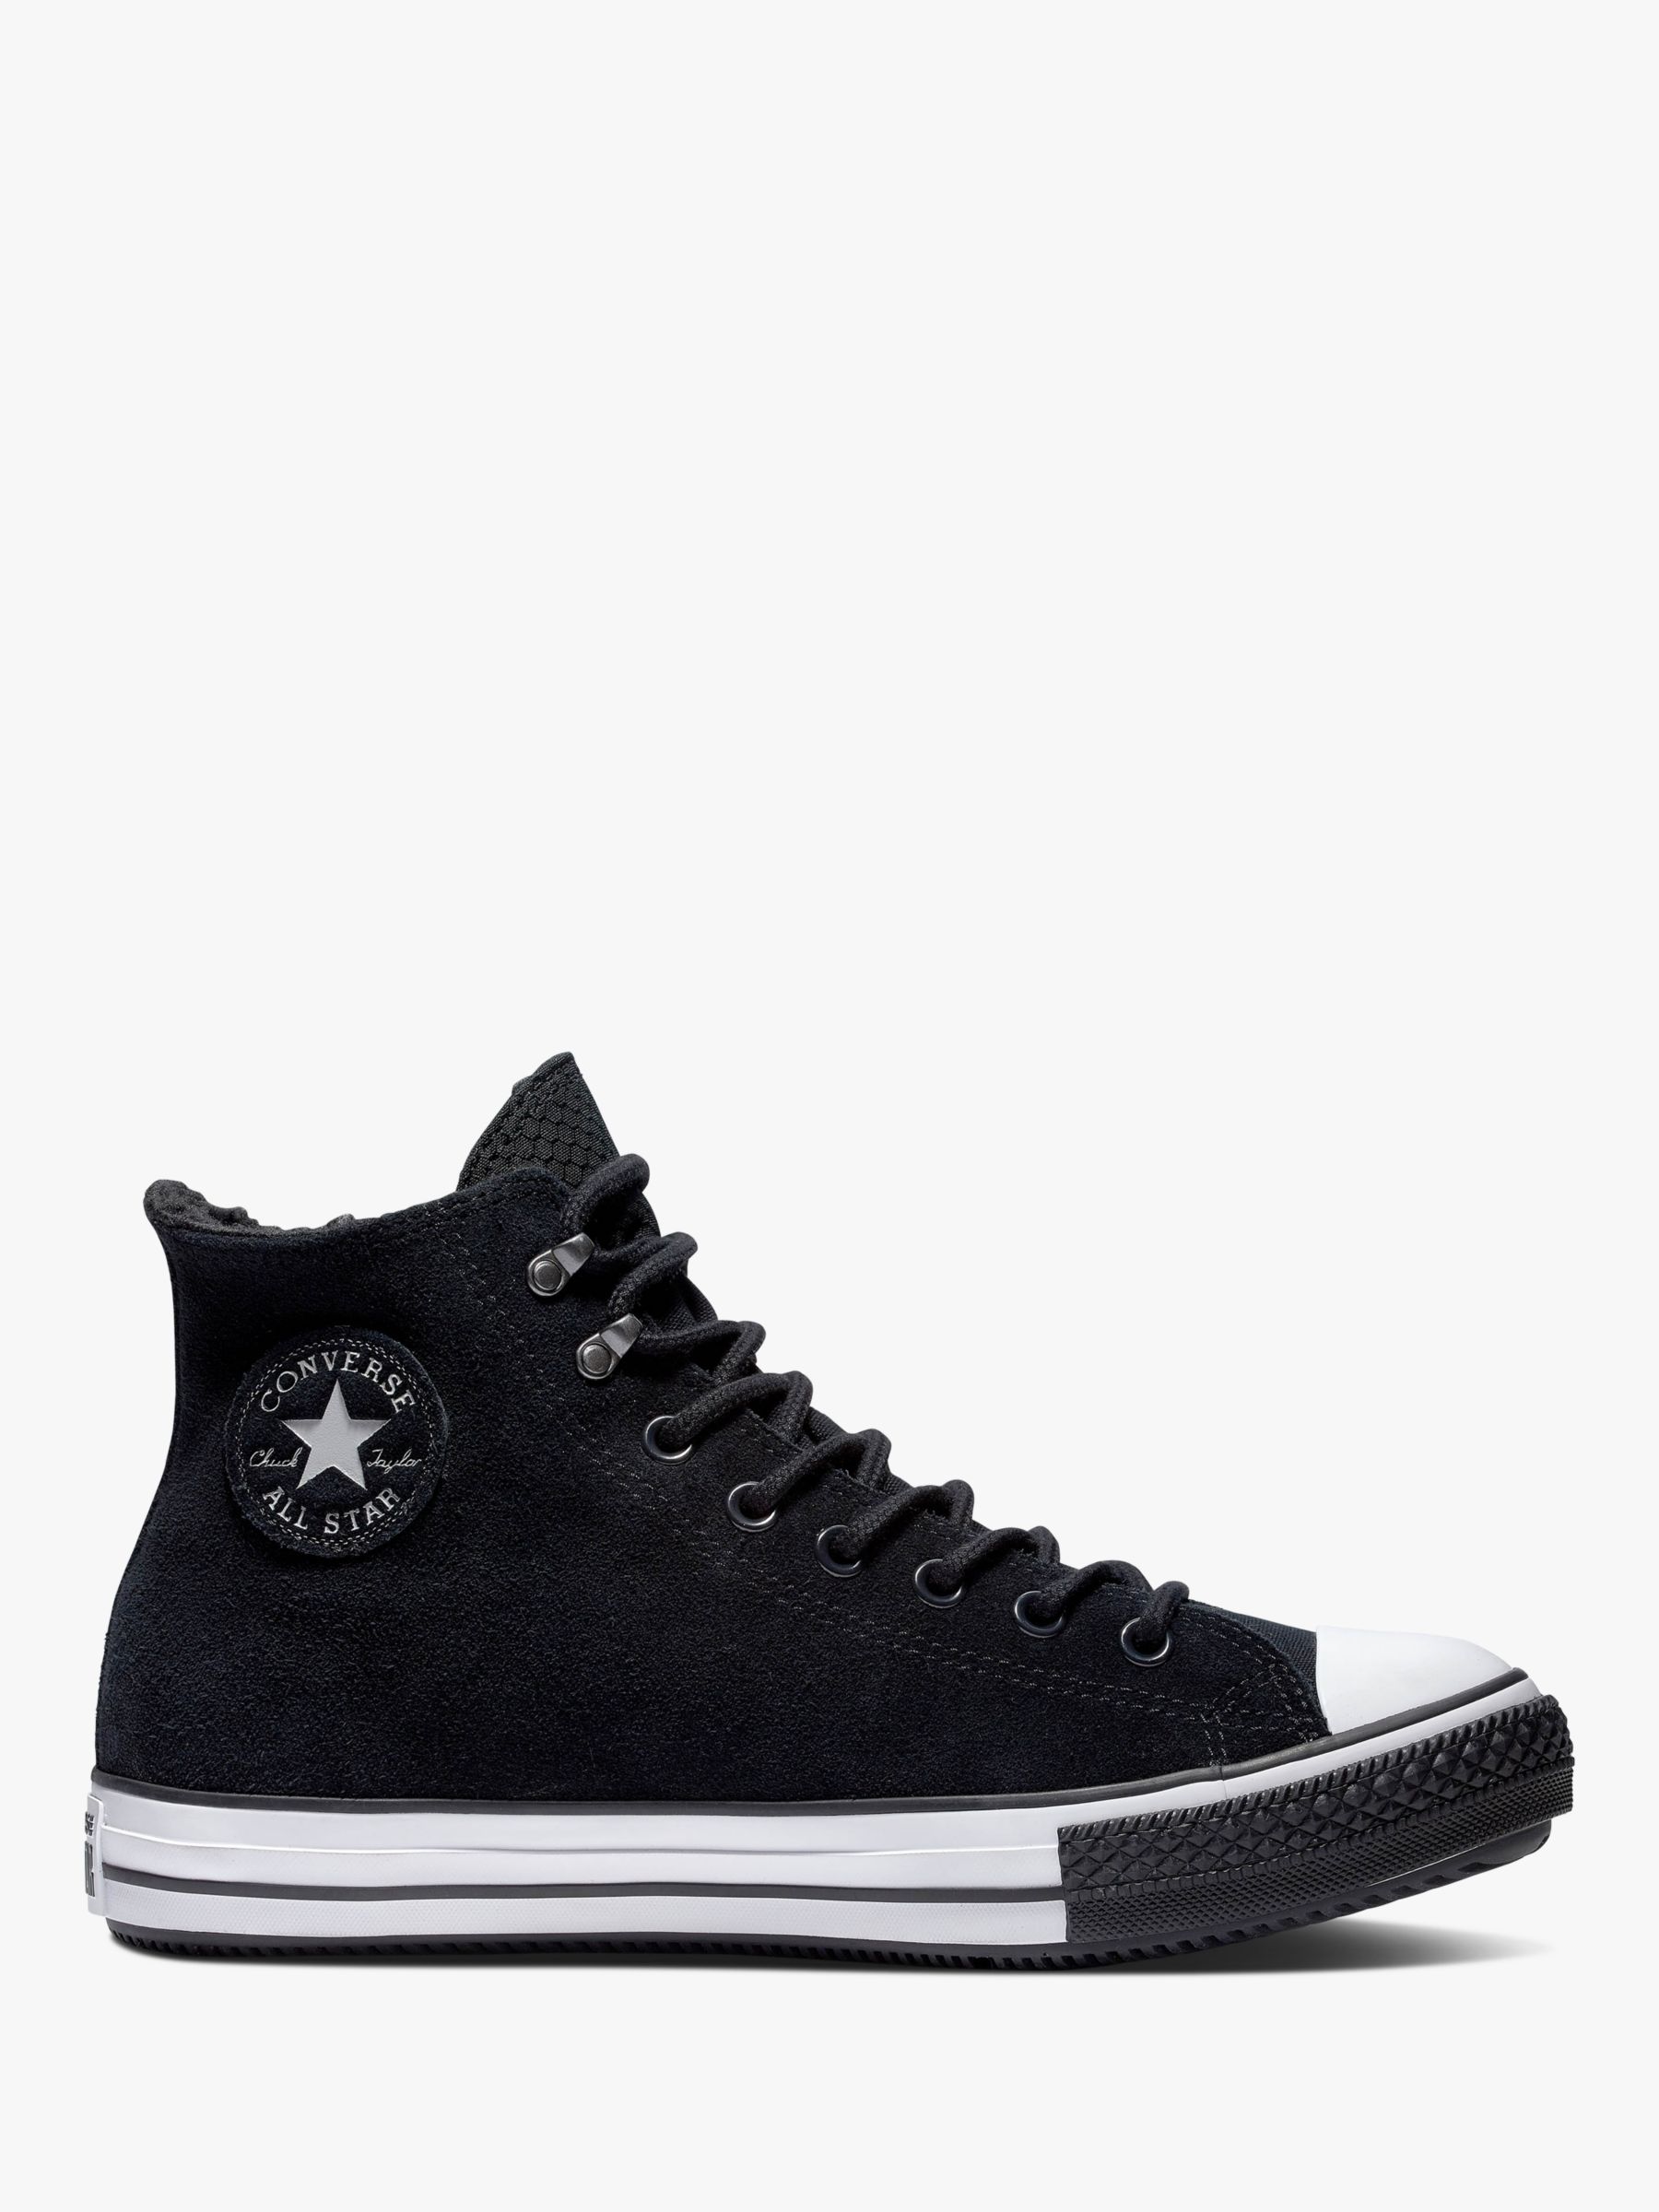 converse chuck taylor all star pro core suede high top